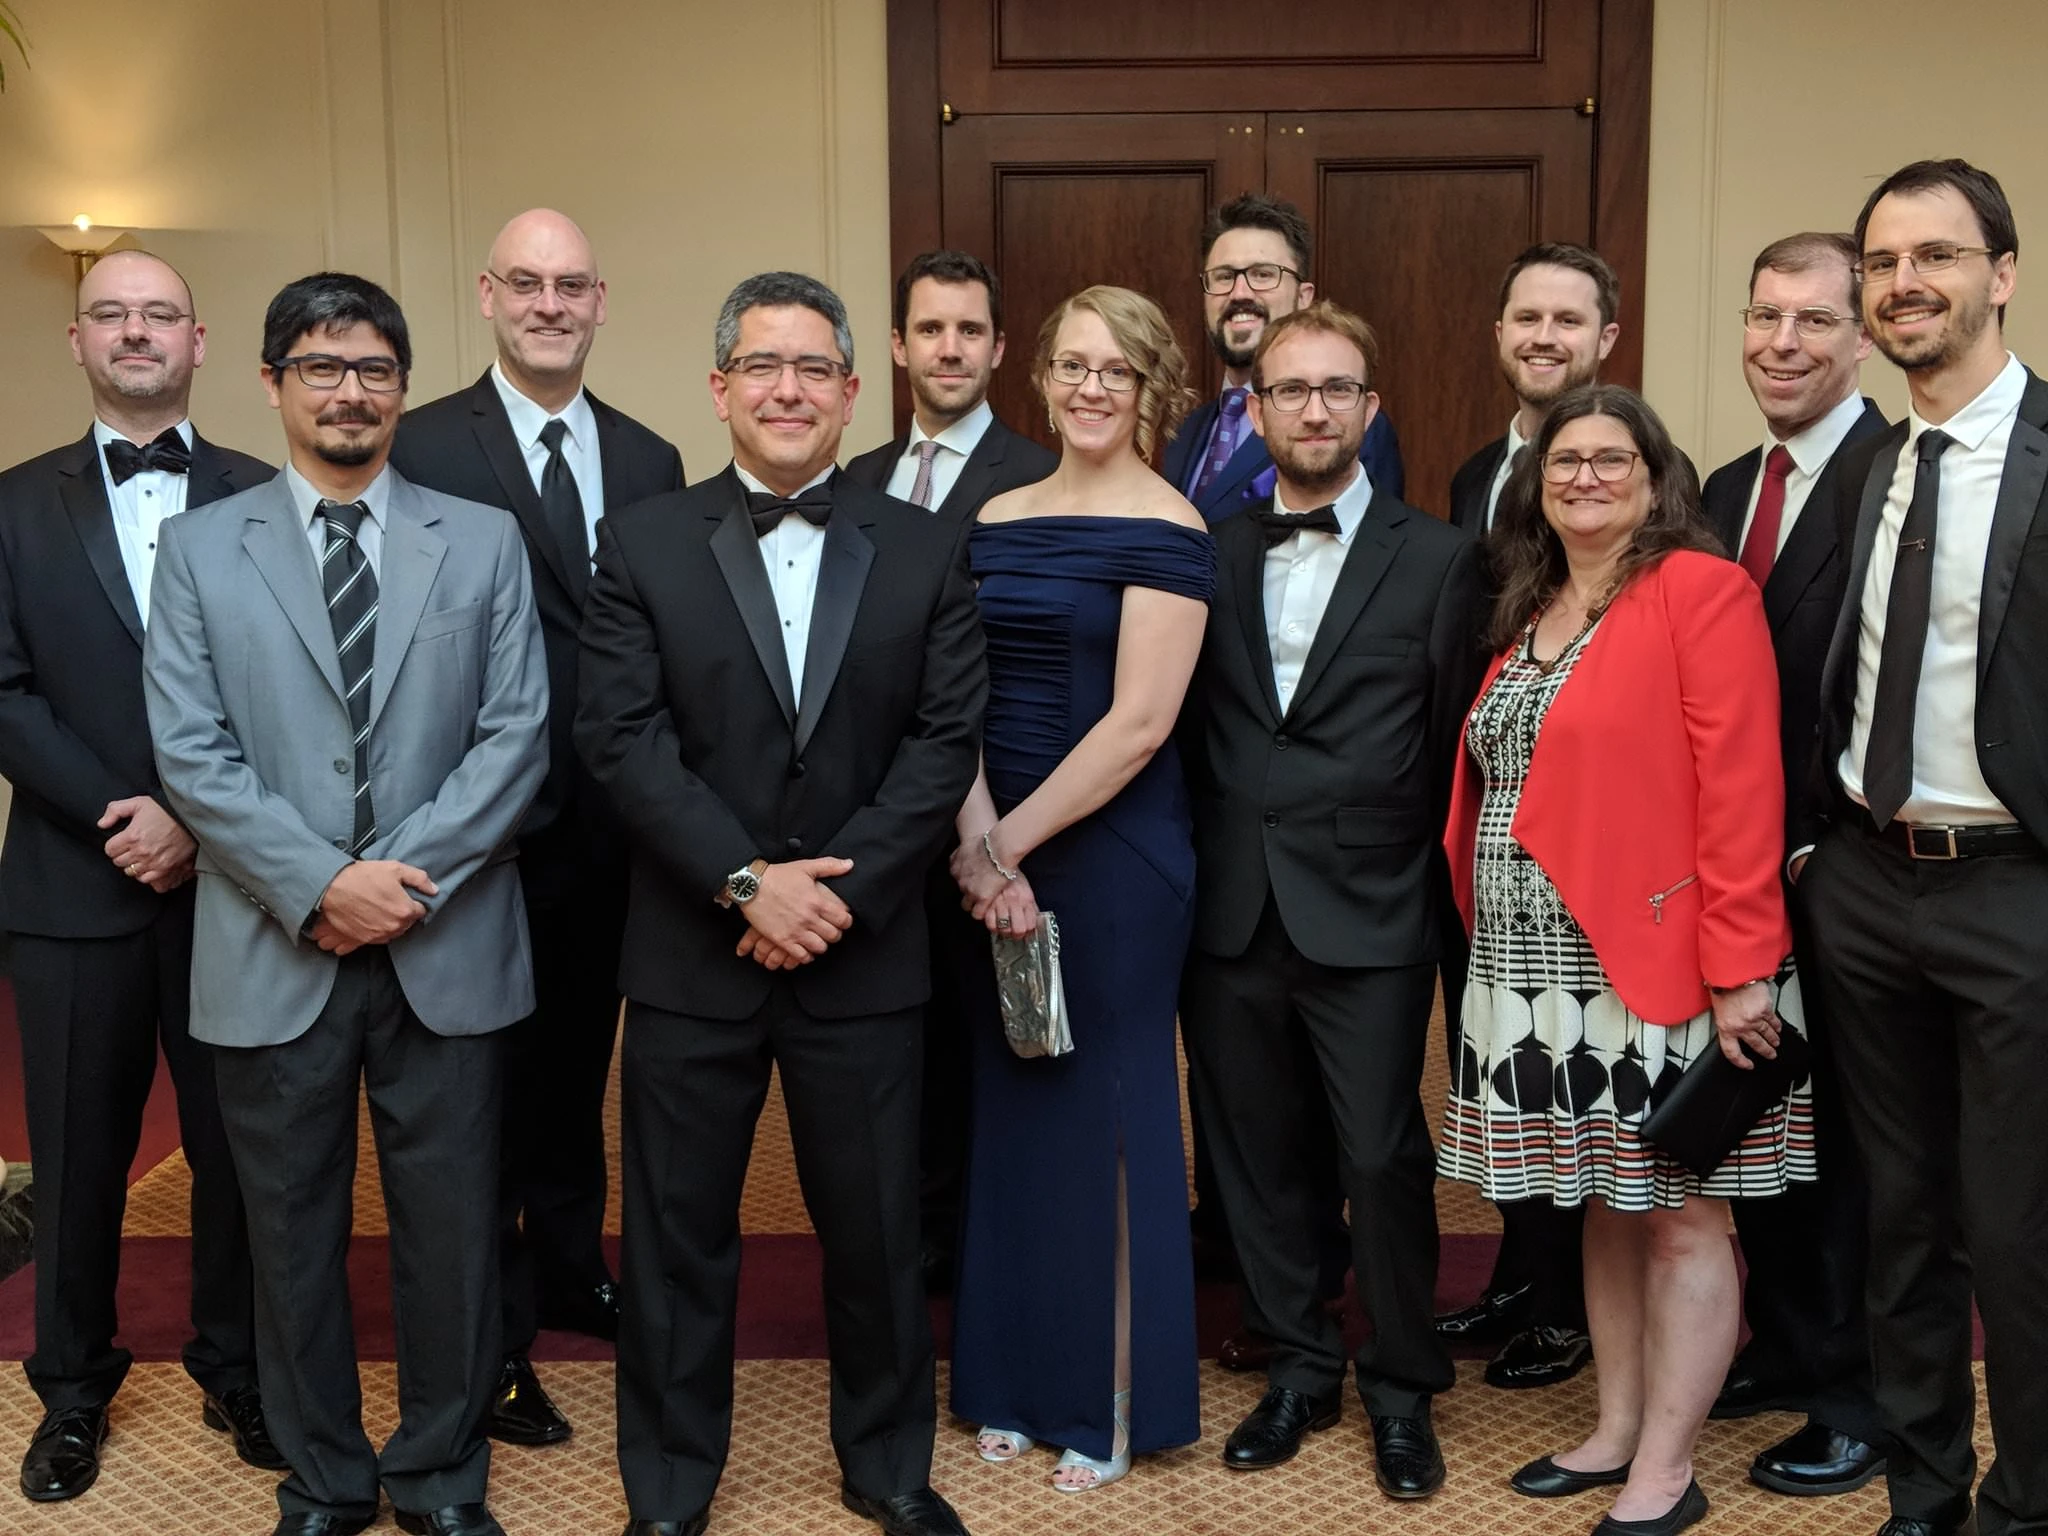 Members of the Project Jupyter Steering Council at the ACM Awards Dinner on Saturday, June 23, 2018